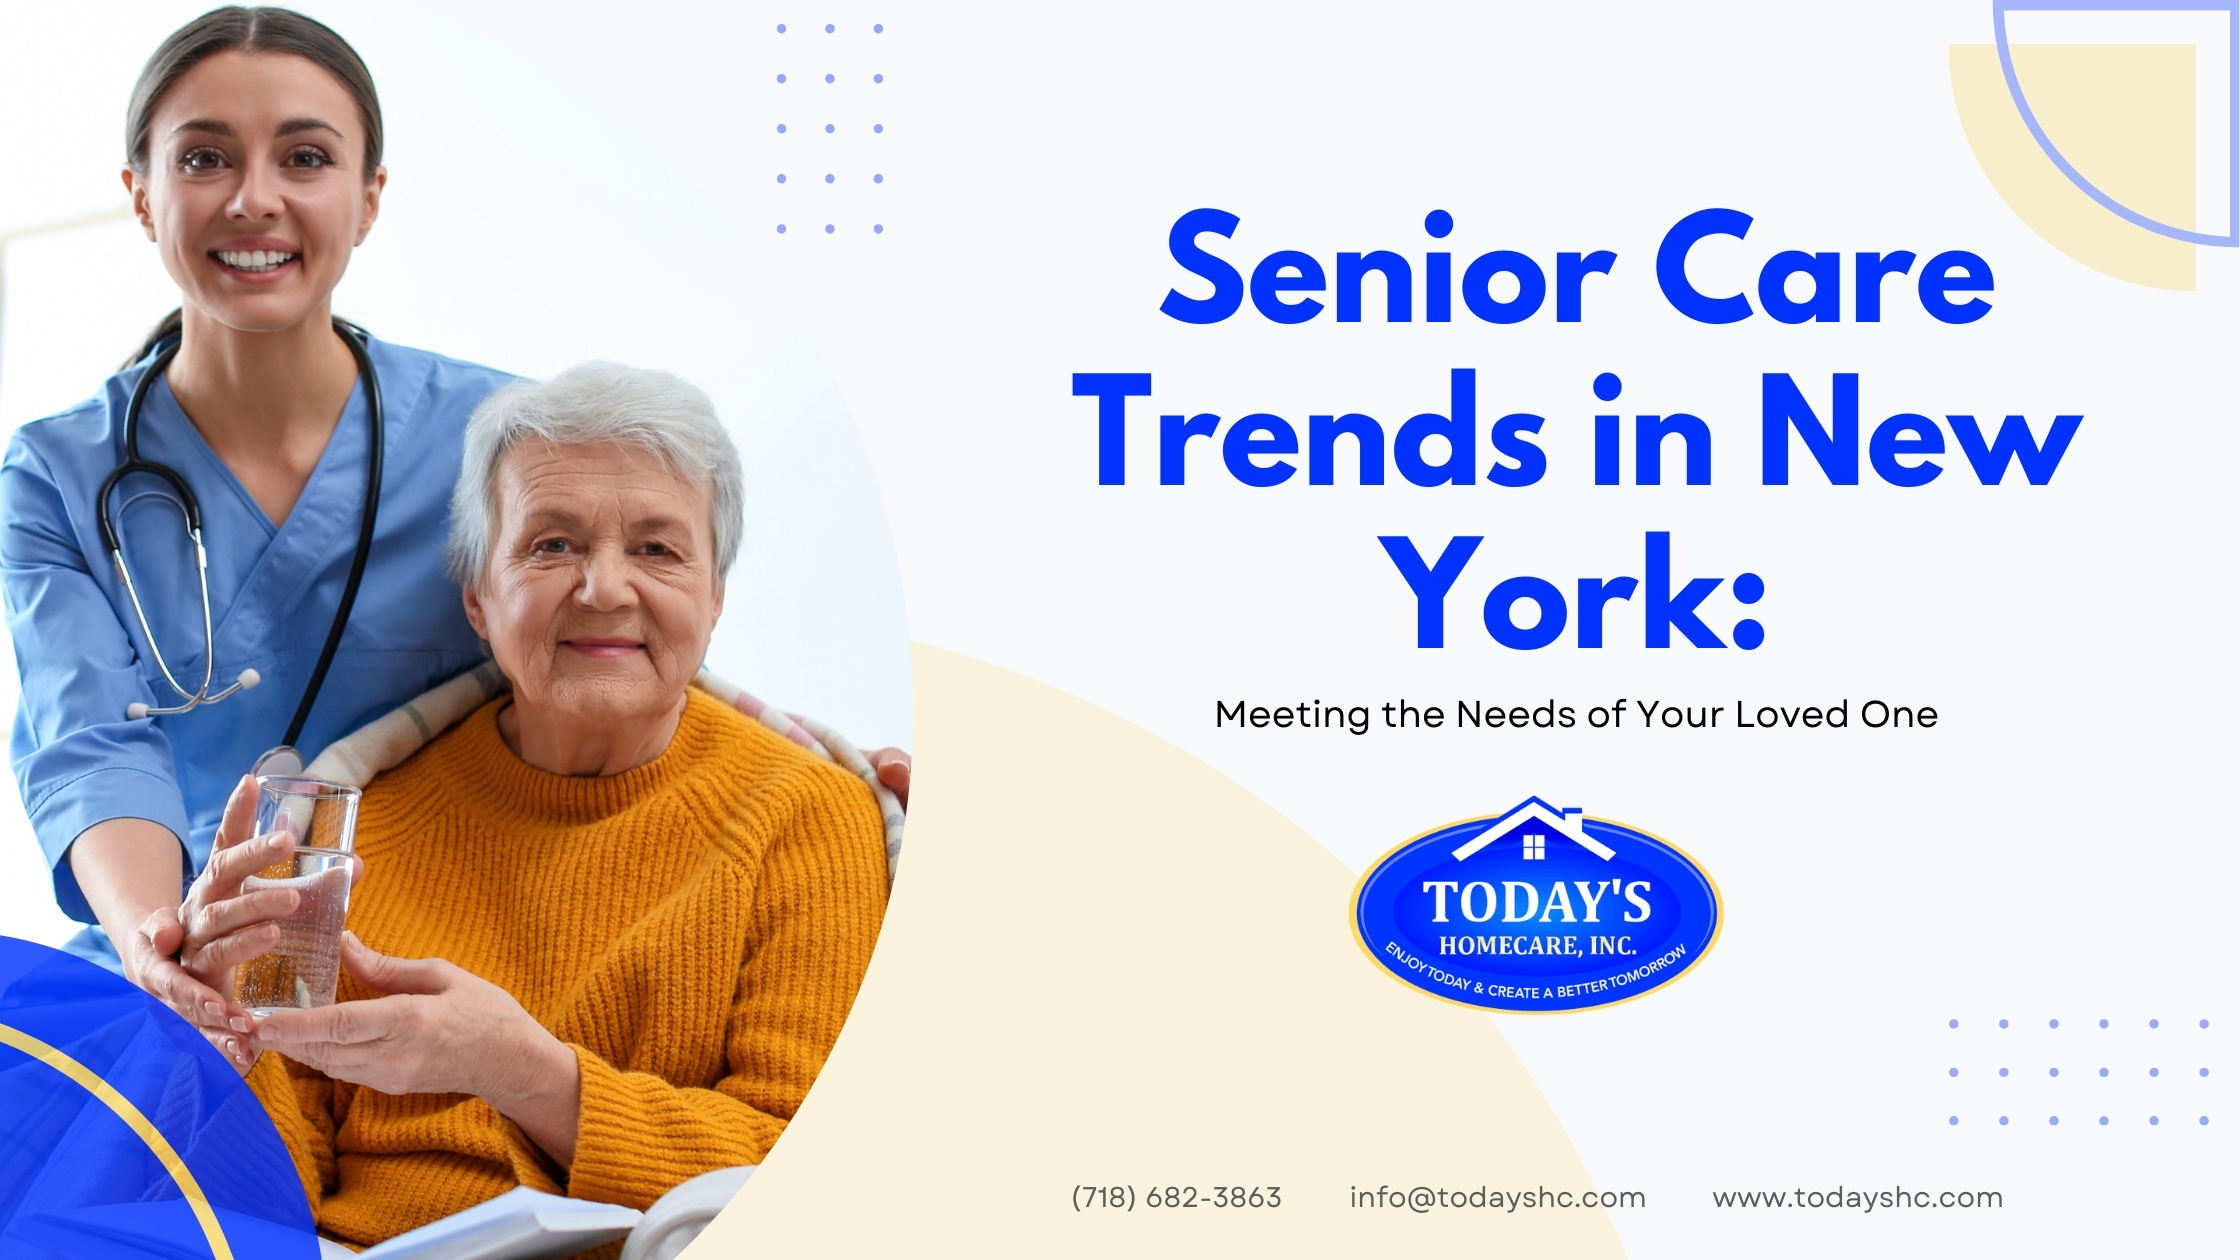 Senior Care Trends in New York Meeting the Needs of Your Loved One